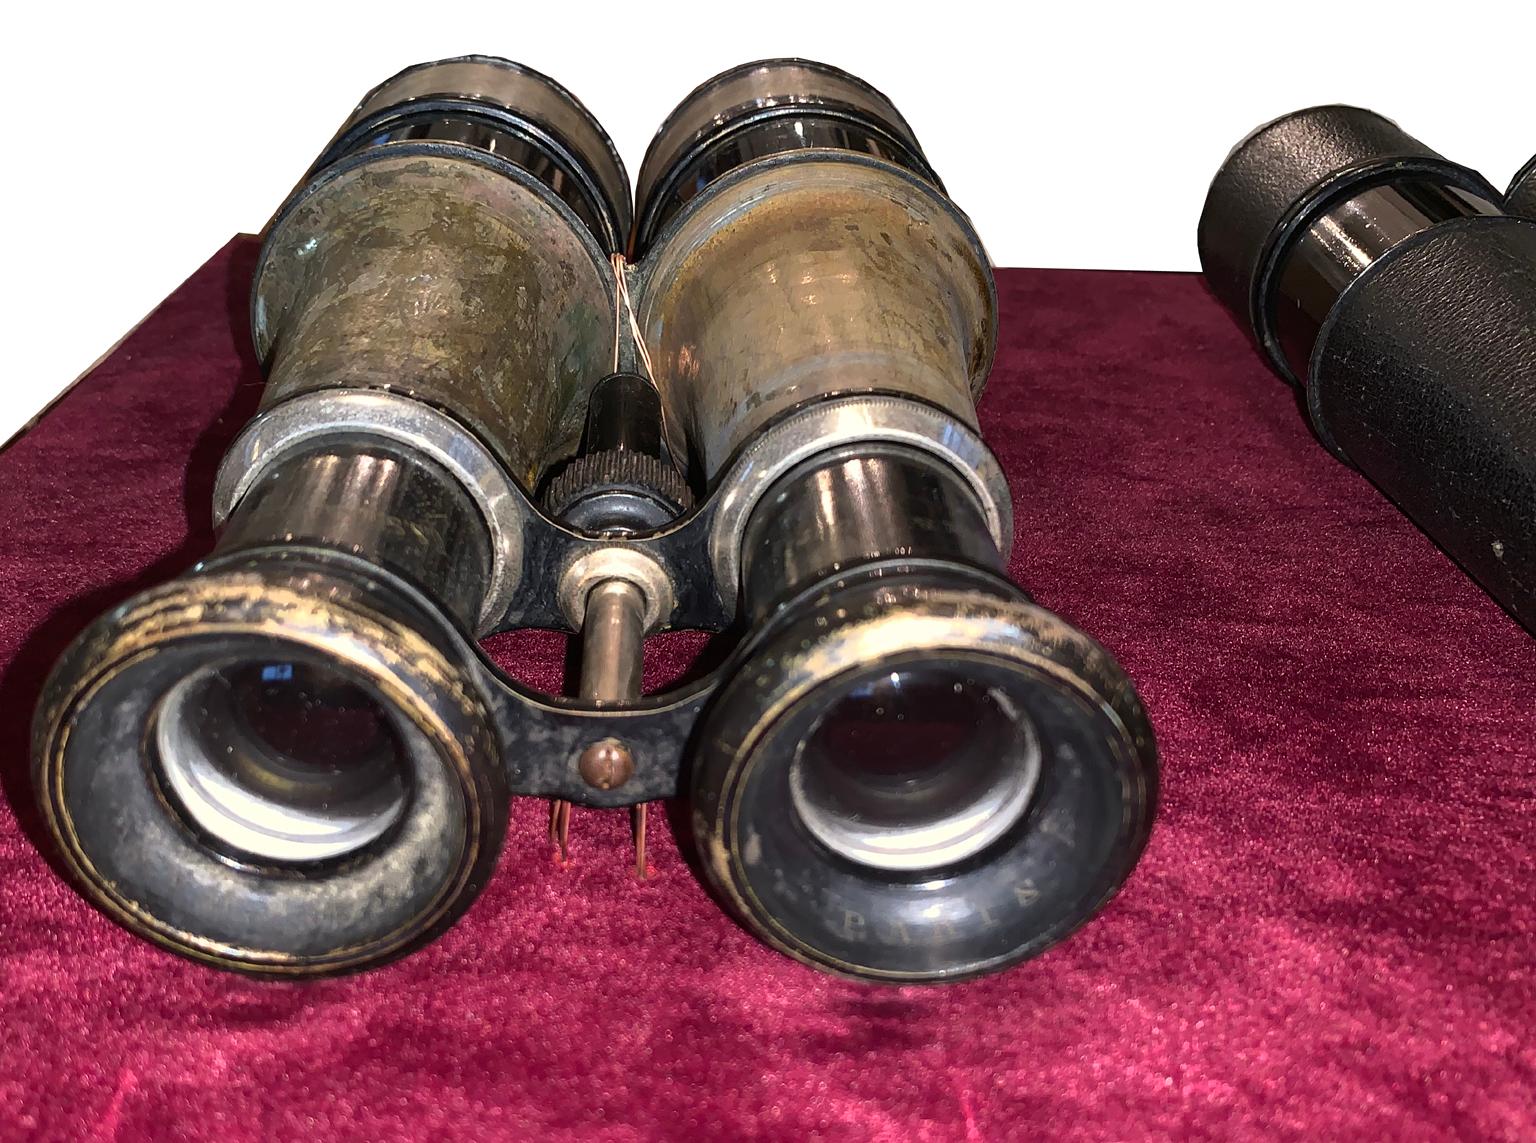 Set of three Civil war binoculars in a beautiful mahogany shadow box. Each elegantly mounted on a felt back drop this piece makes a special office or den wall mount. The box can set upright or be mounted on a wall.